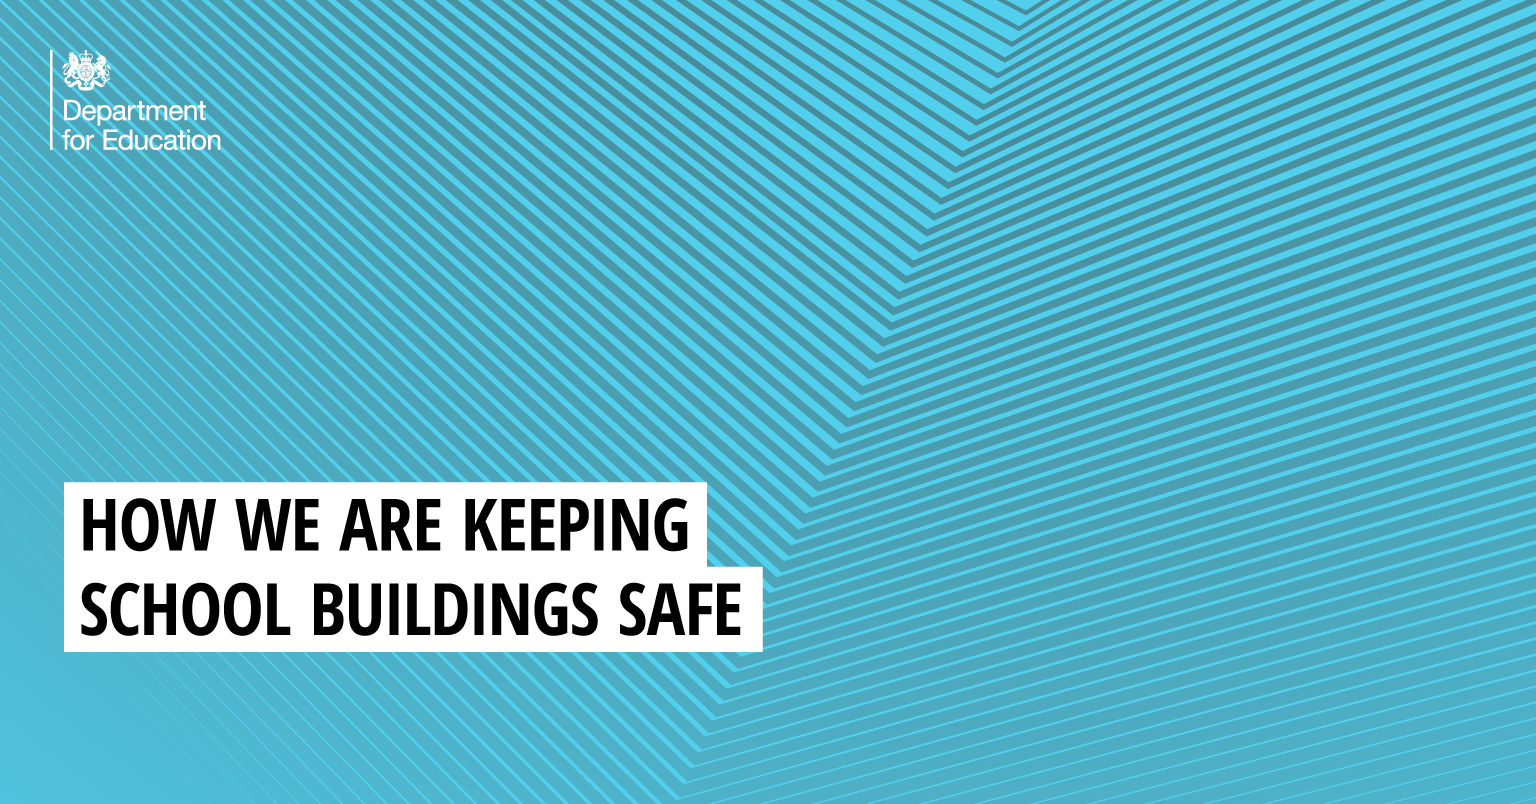 How we are keeping school buildings safe